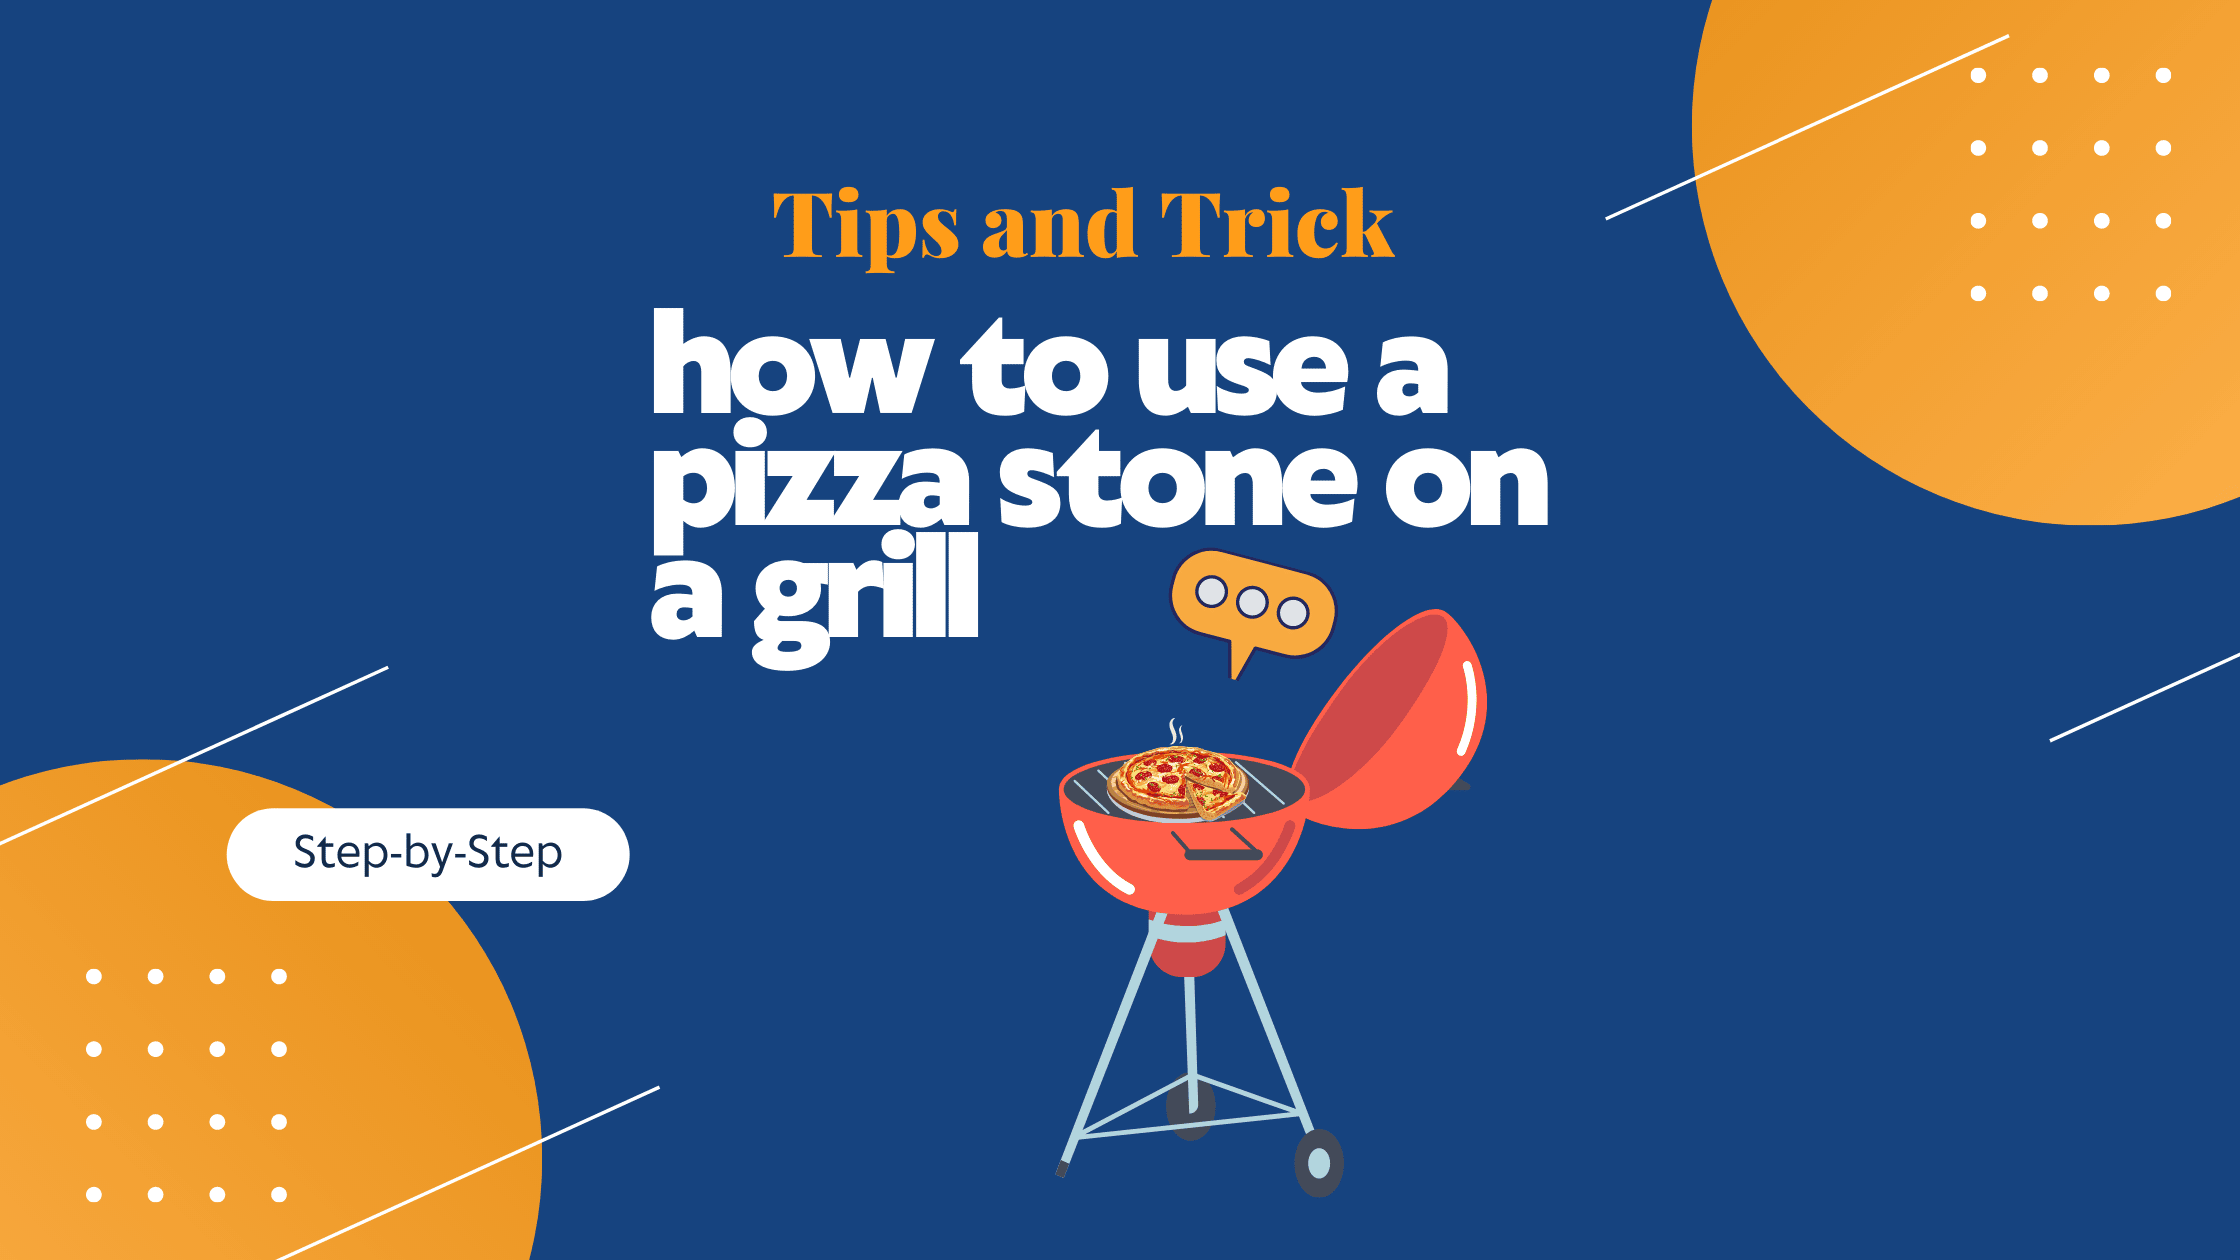 How to Use a Pizza Stone on a Grill (#1 Beginner’s Guide)